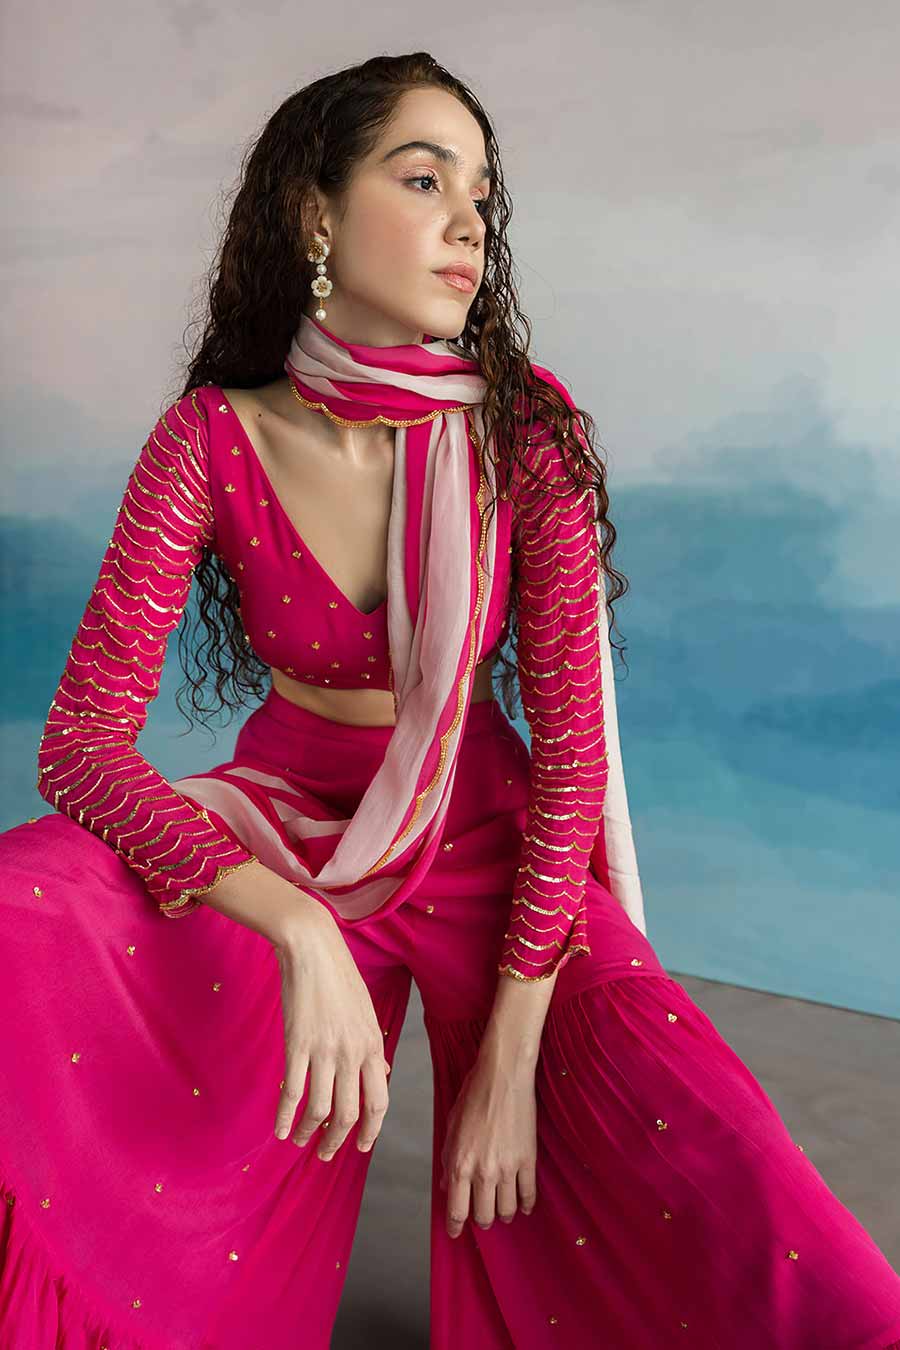 Pink Striped Palazzo Saree With Blouse